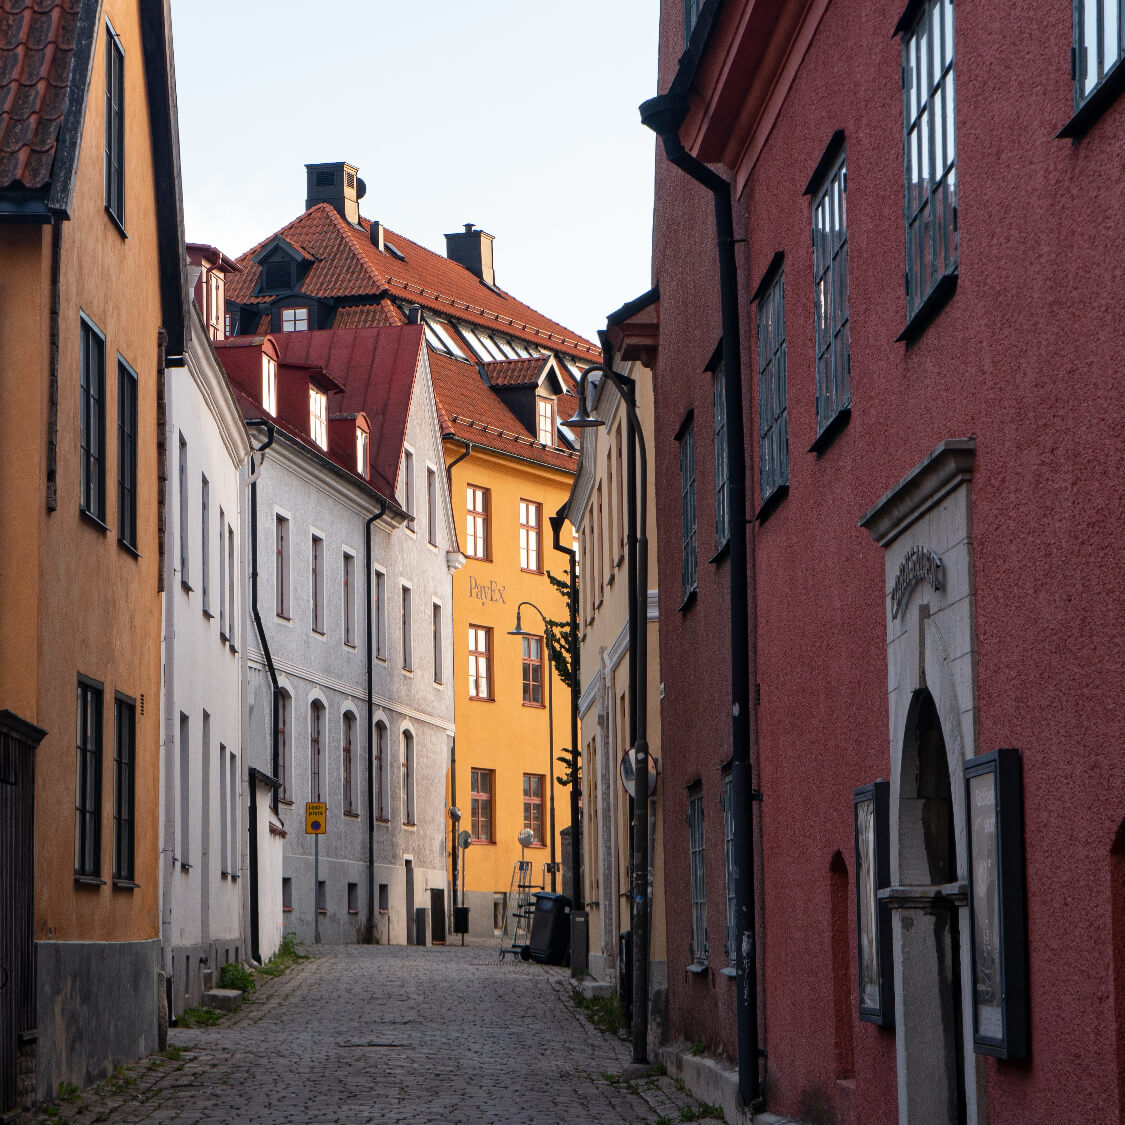 Picturesque alley with colorful houses in Visby.